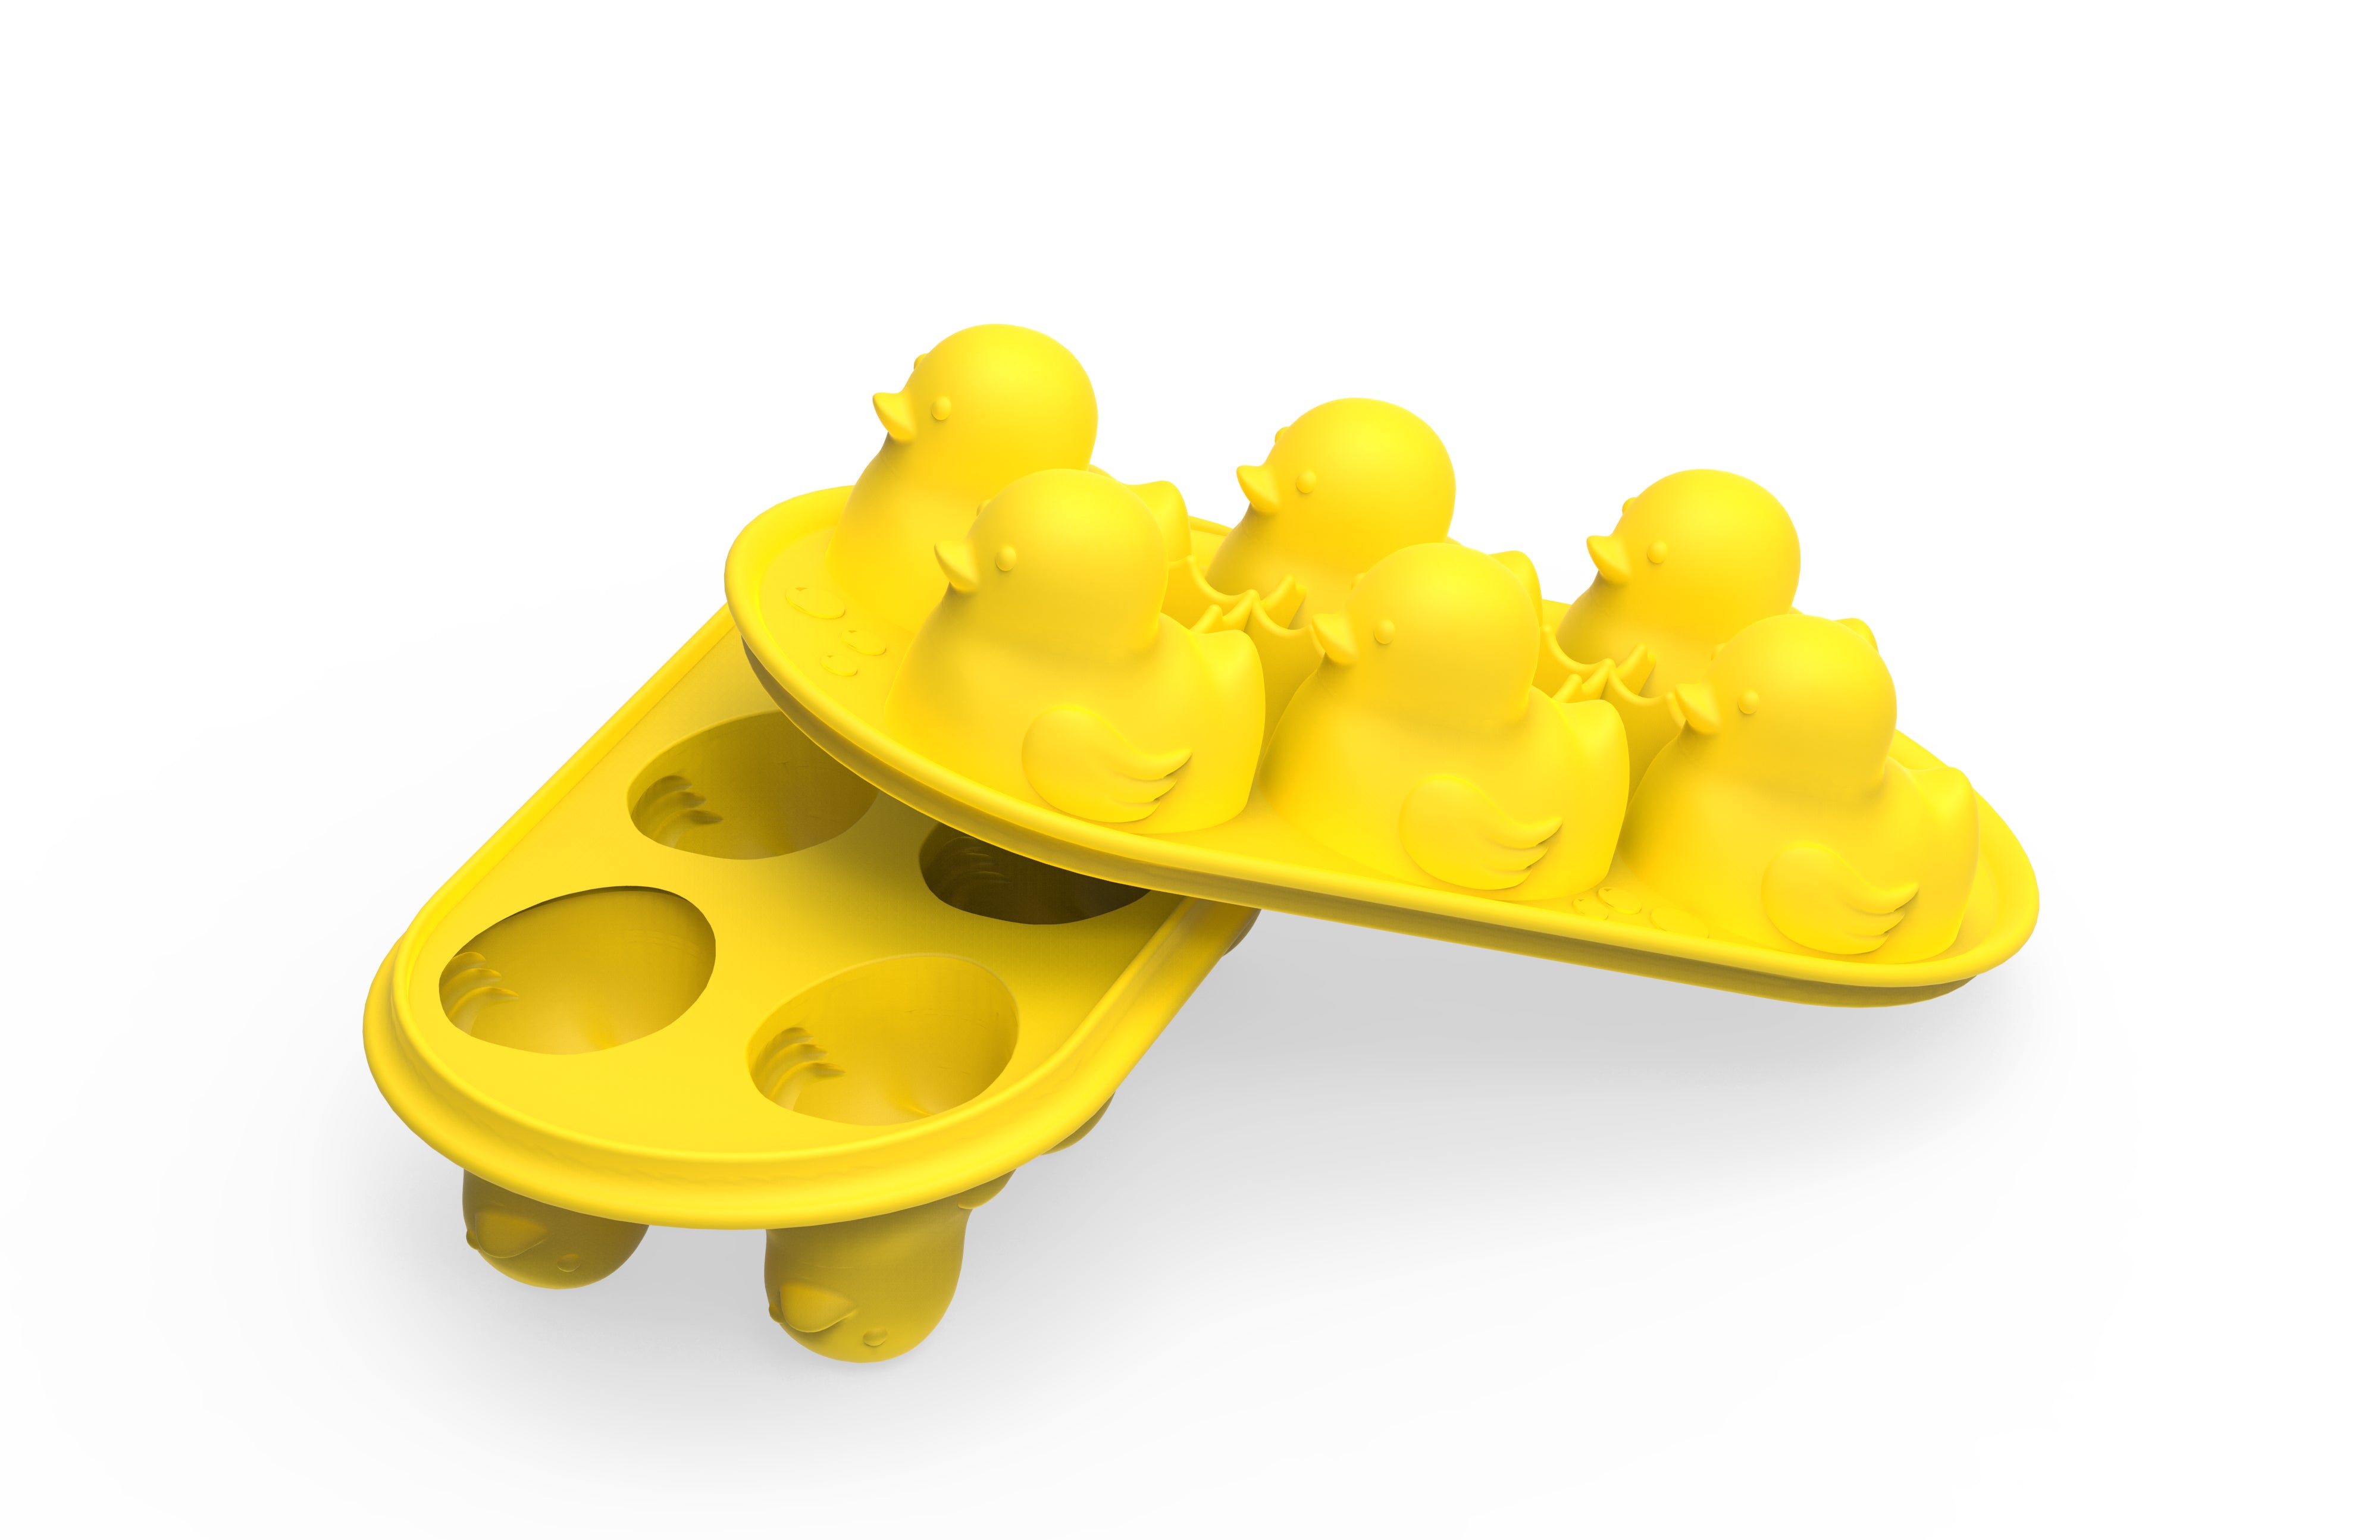 Quack the Ice Silicone Ice Cube Tray 